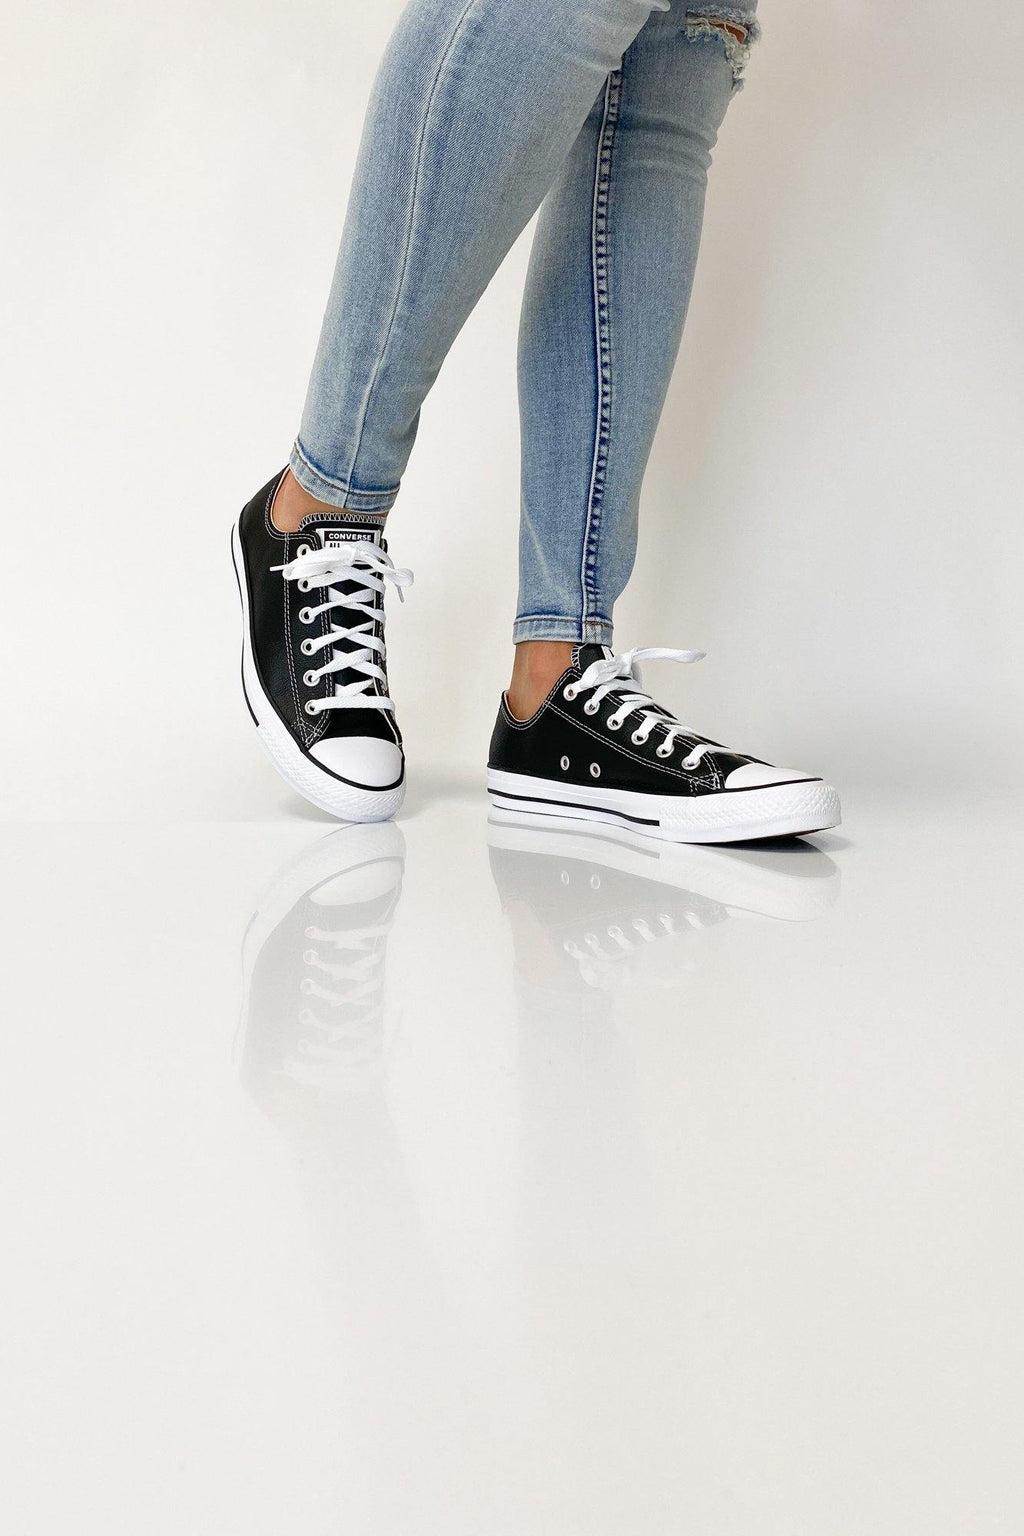 Converse Chuck Taylor All Star Leather Low Black | Shine On NZ